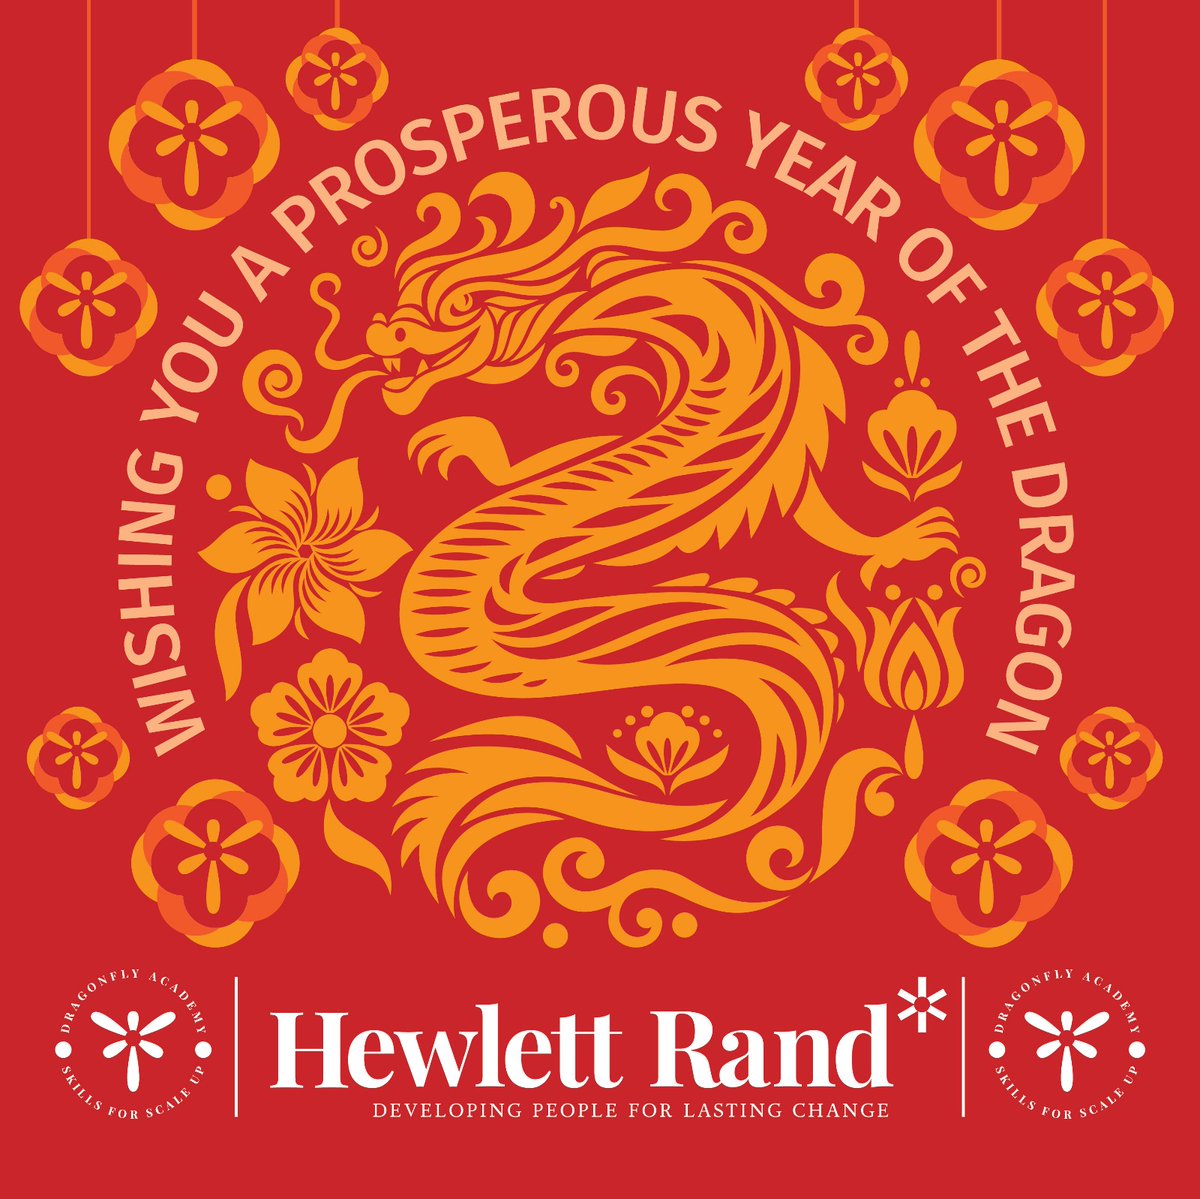 Hewlett Rand wishes you every good fortune for the new lunar year. #YearOfTheDragon #DragonflyAcademy Skills to Scale: lnkd.in/e6caHd5T Skills to Growth: lnkd.in/ehzMkbyx